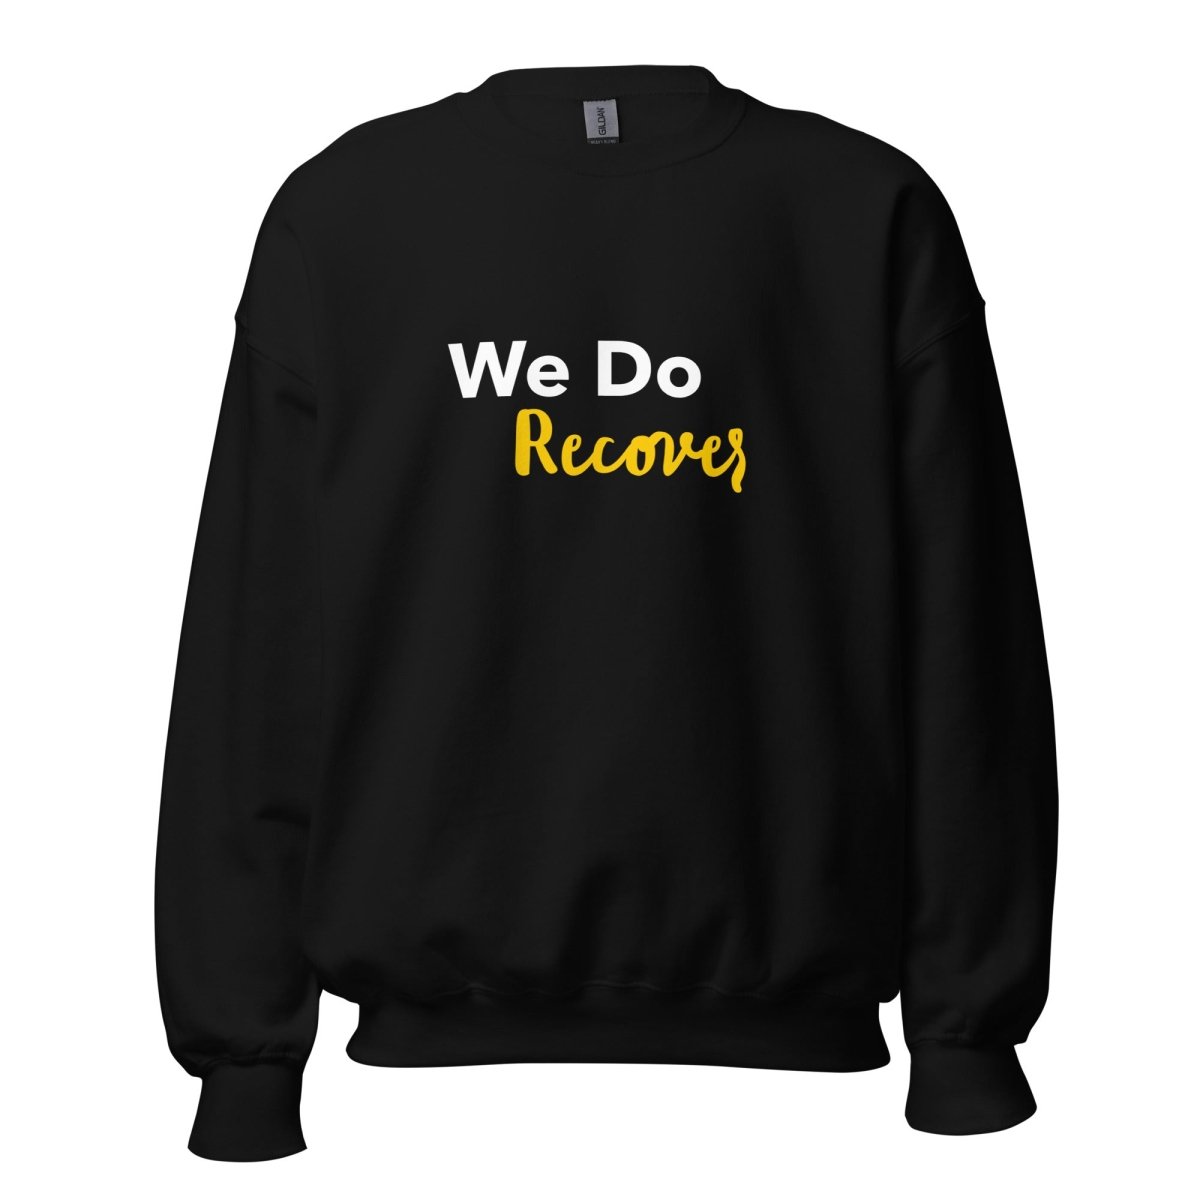 We Do Recover: Embrace Hope and Resilience Sweatshirt - Sobervation